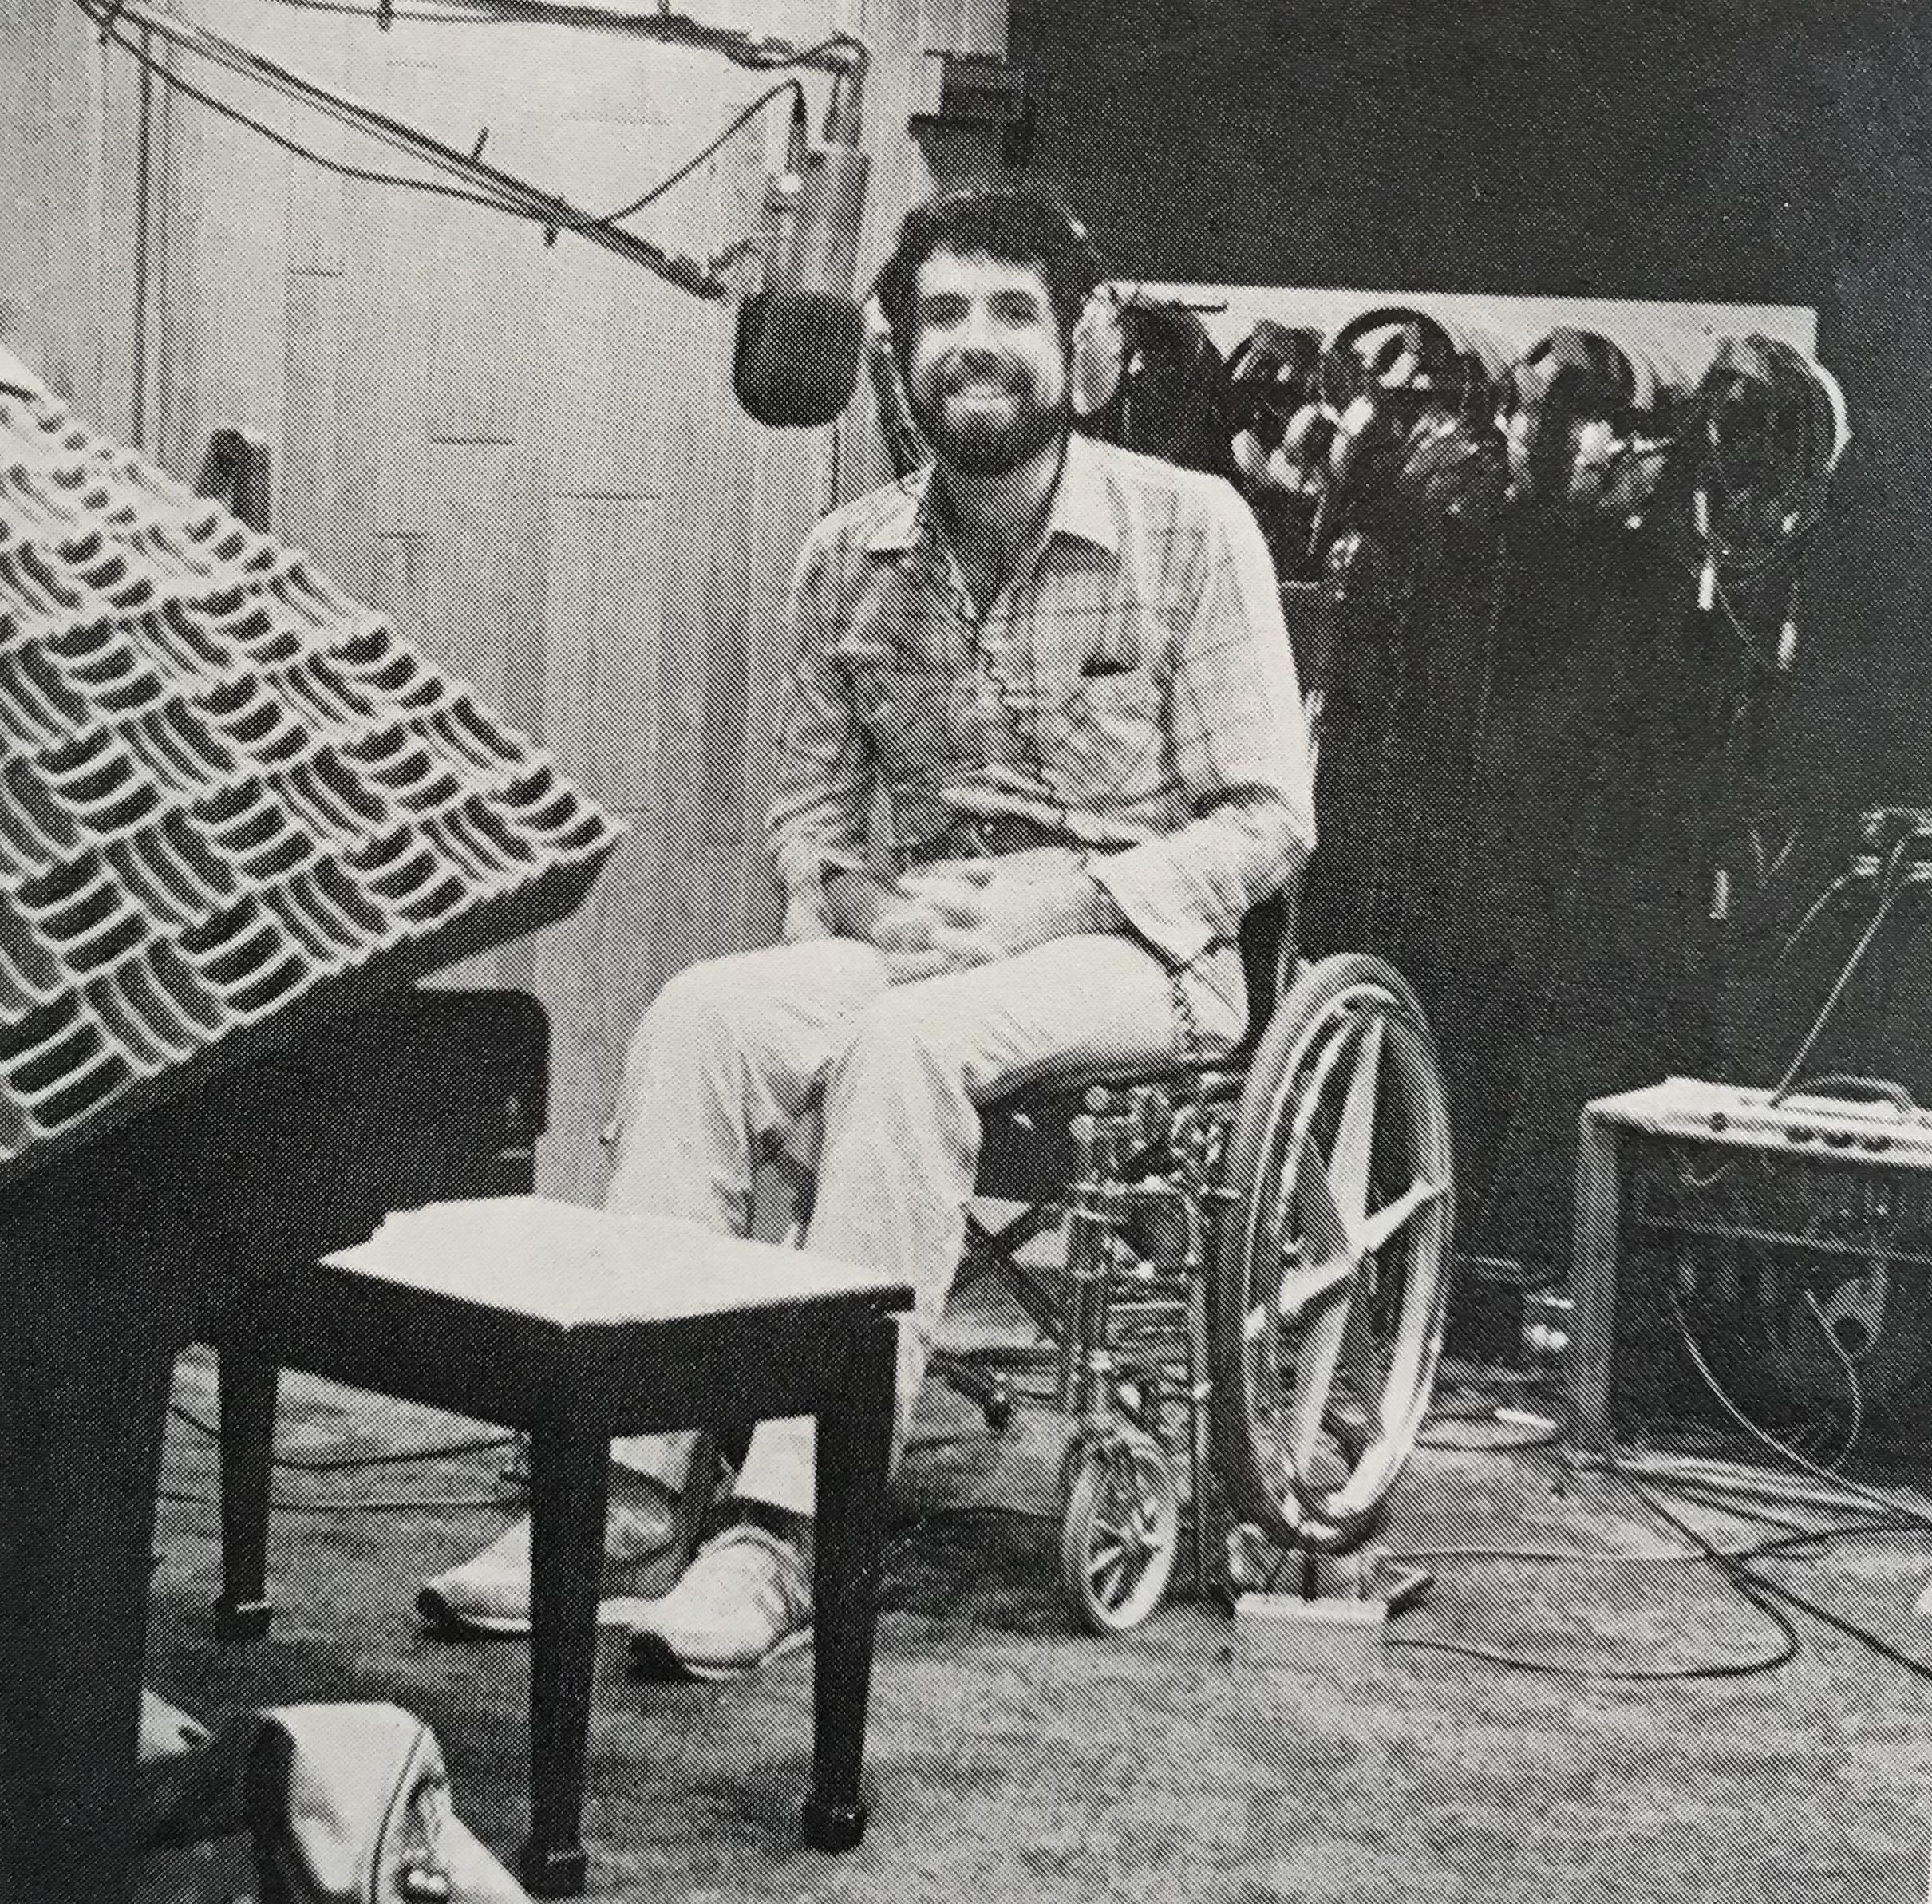 Kit Kamien at the recording studio (Source: Kit Kamien and the Backroom Players)